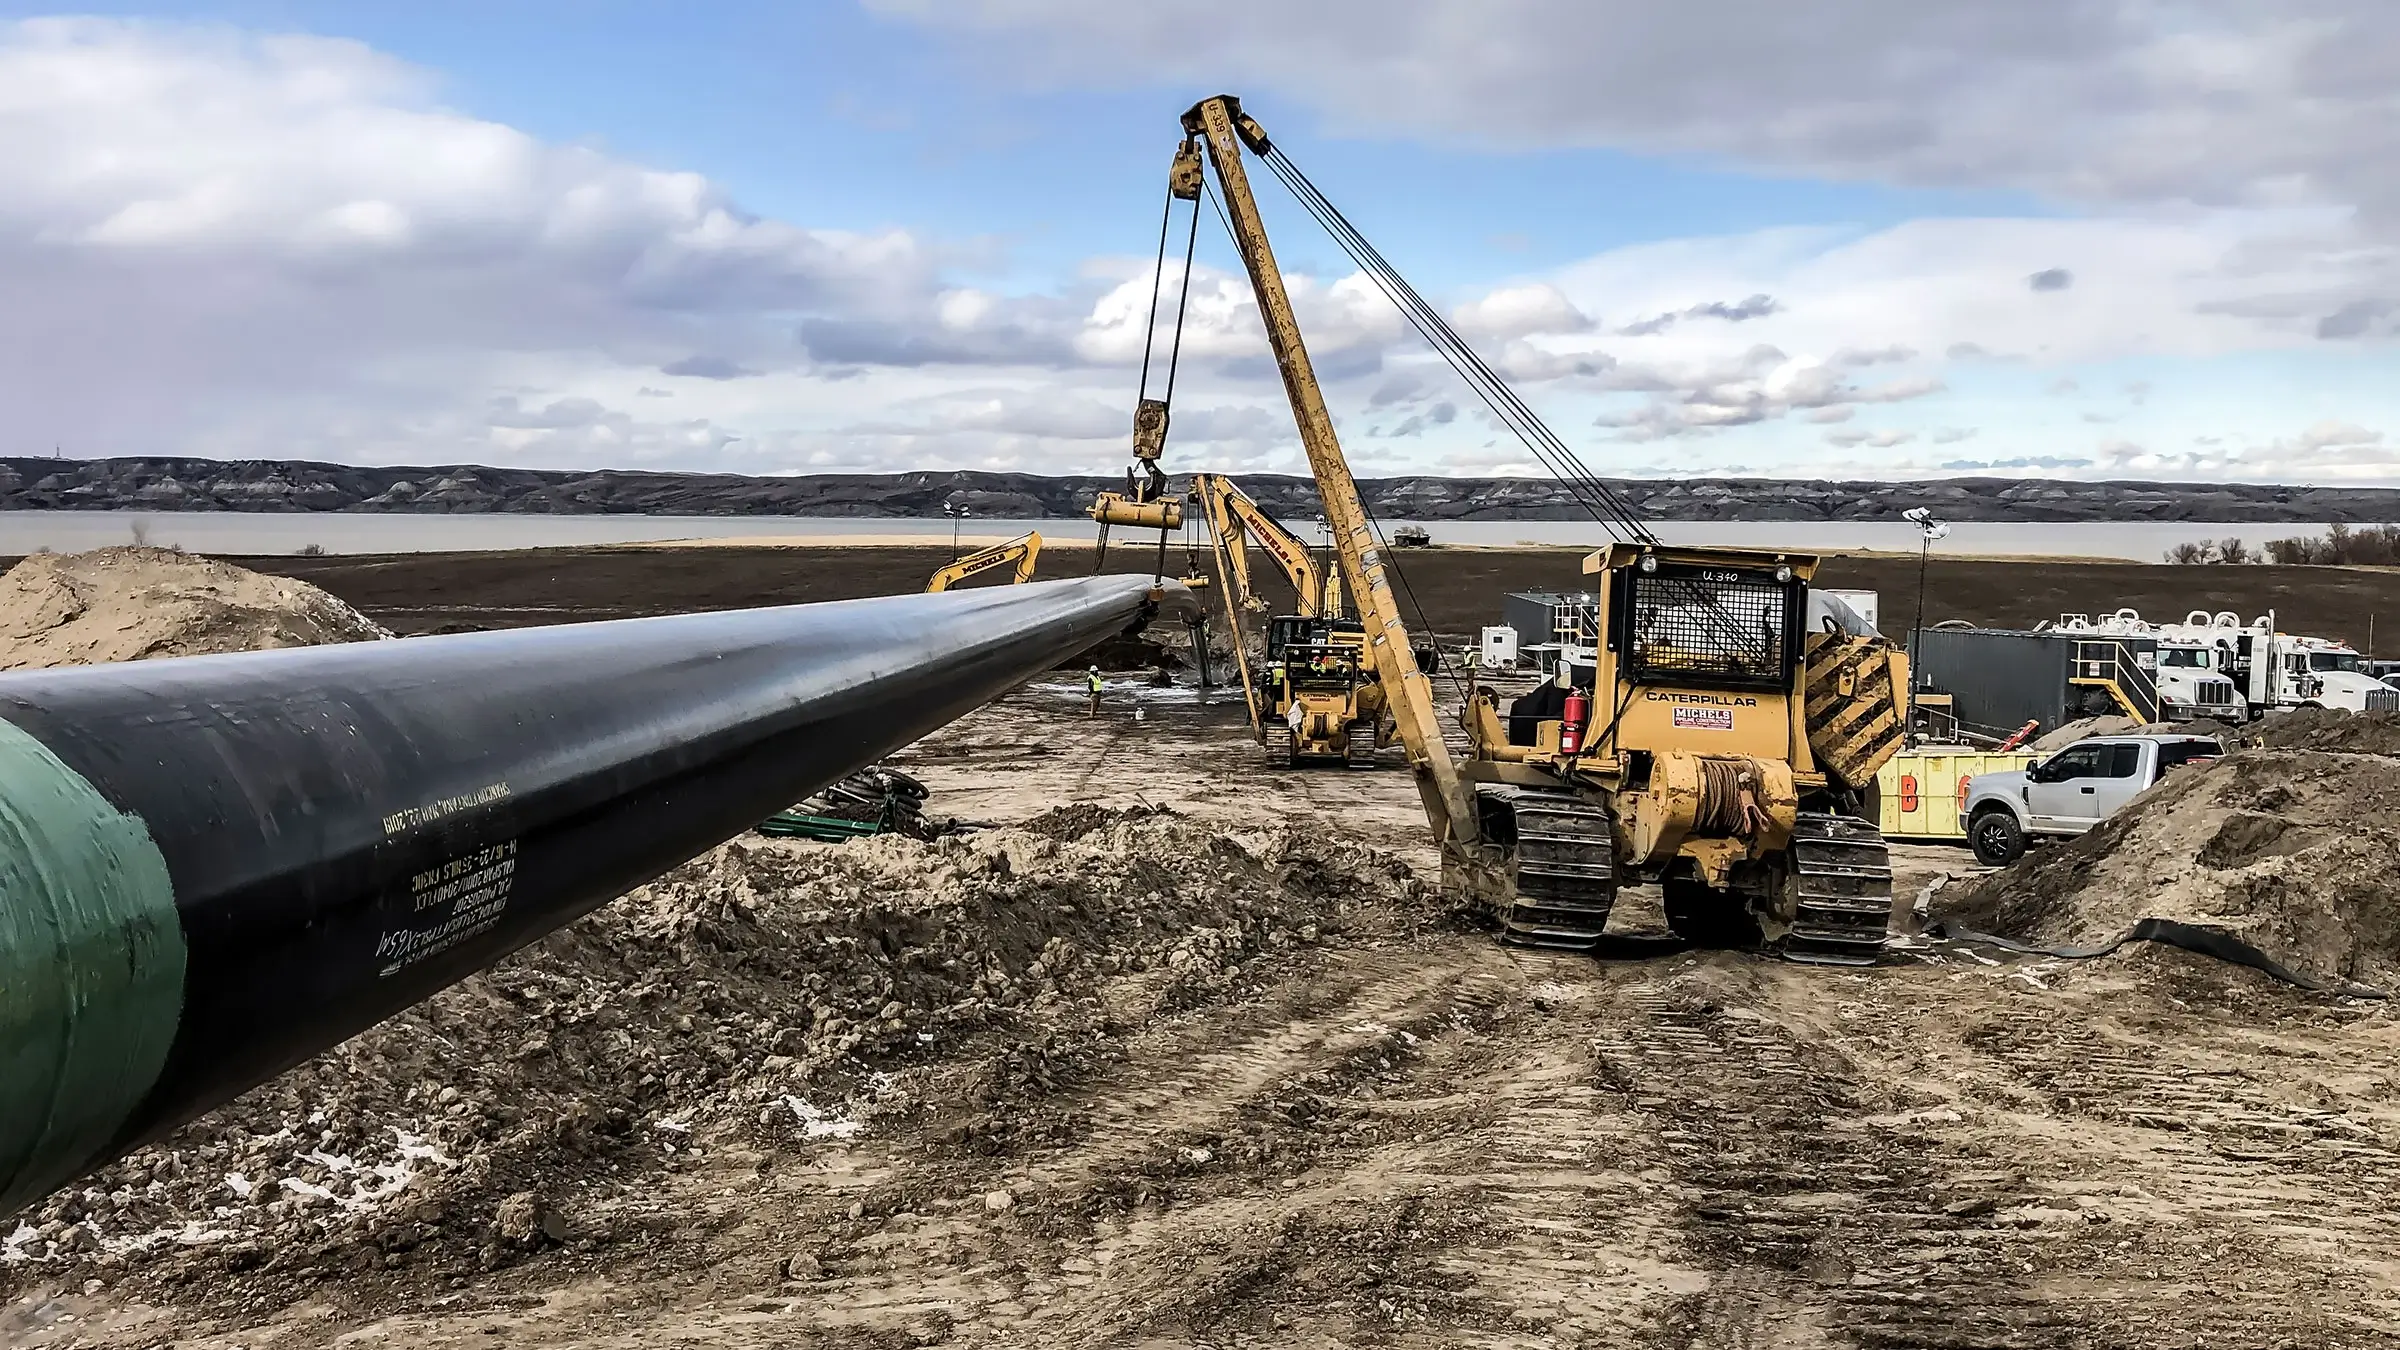 A pipelayer machine assists in supporting a large diameter pipeline near the Missouri River.